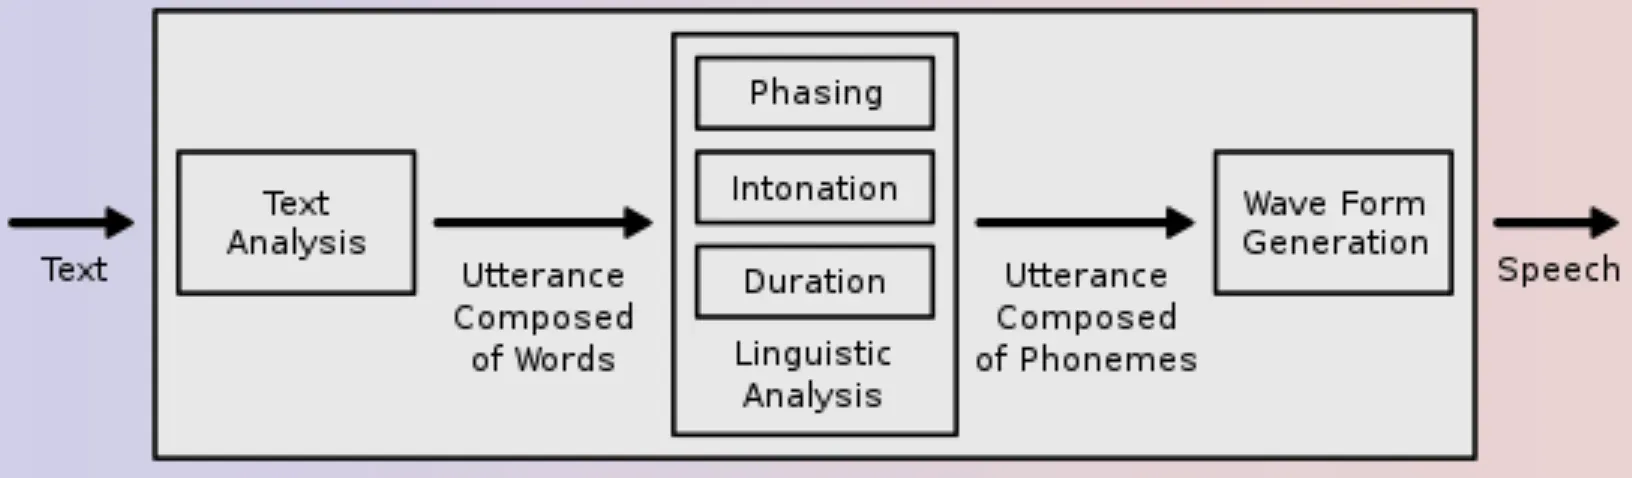 How does Speech Synthesis work?